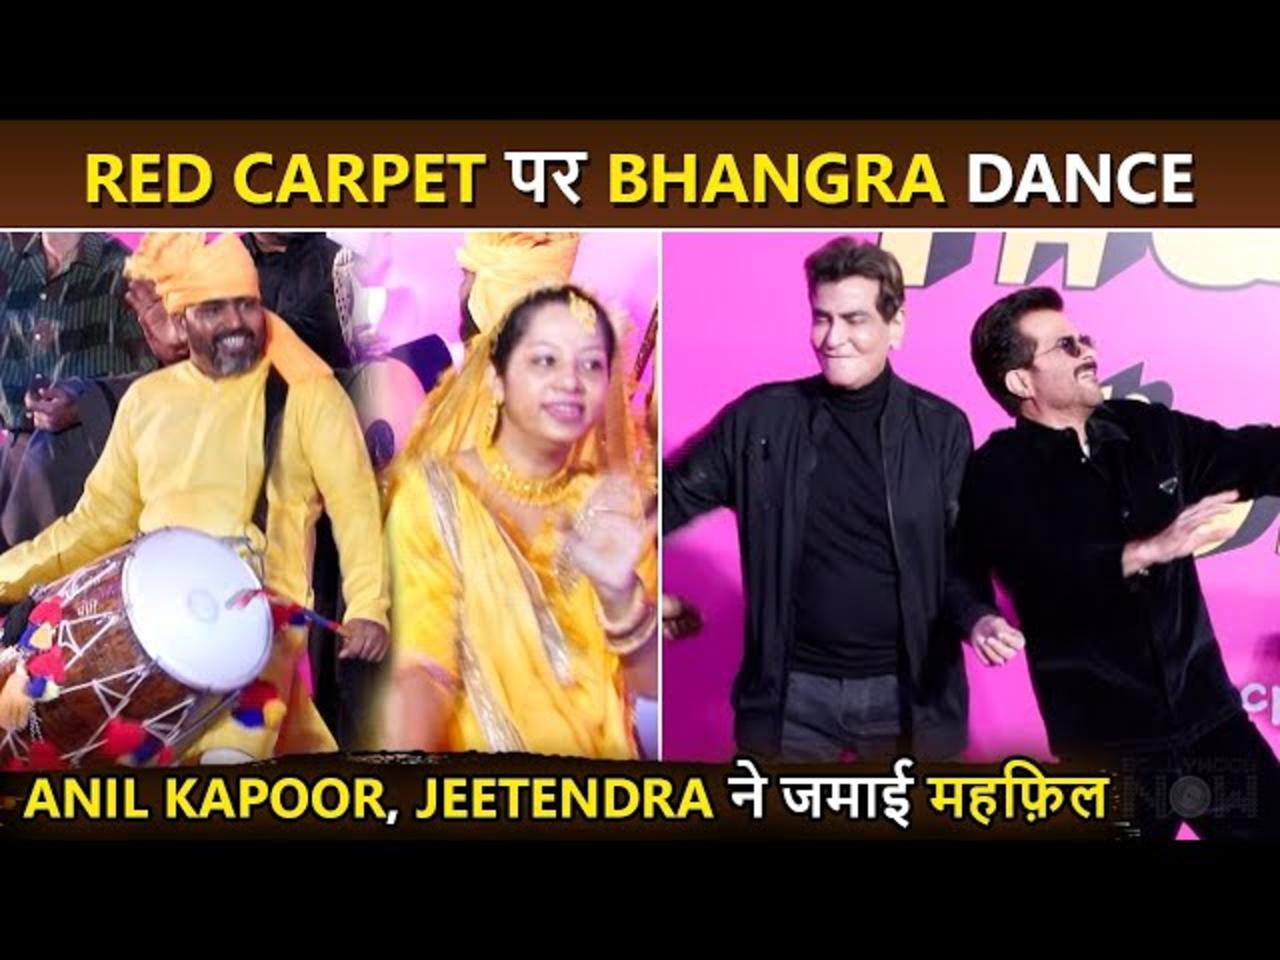 Anil Kapoor, Jeetendra Energetic Bhangra, Dance On Dhol Beat Red Carpet Thank You For Coming